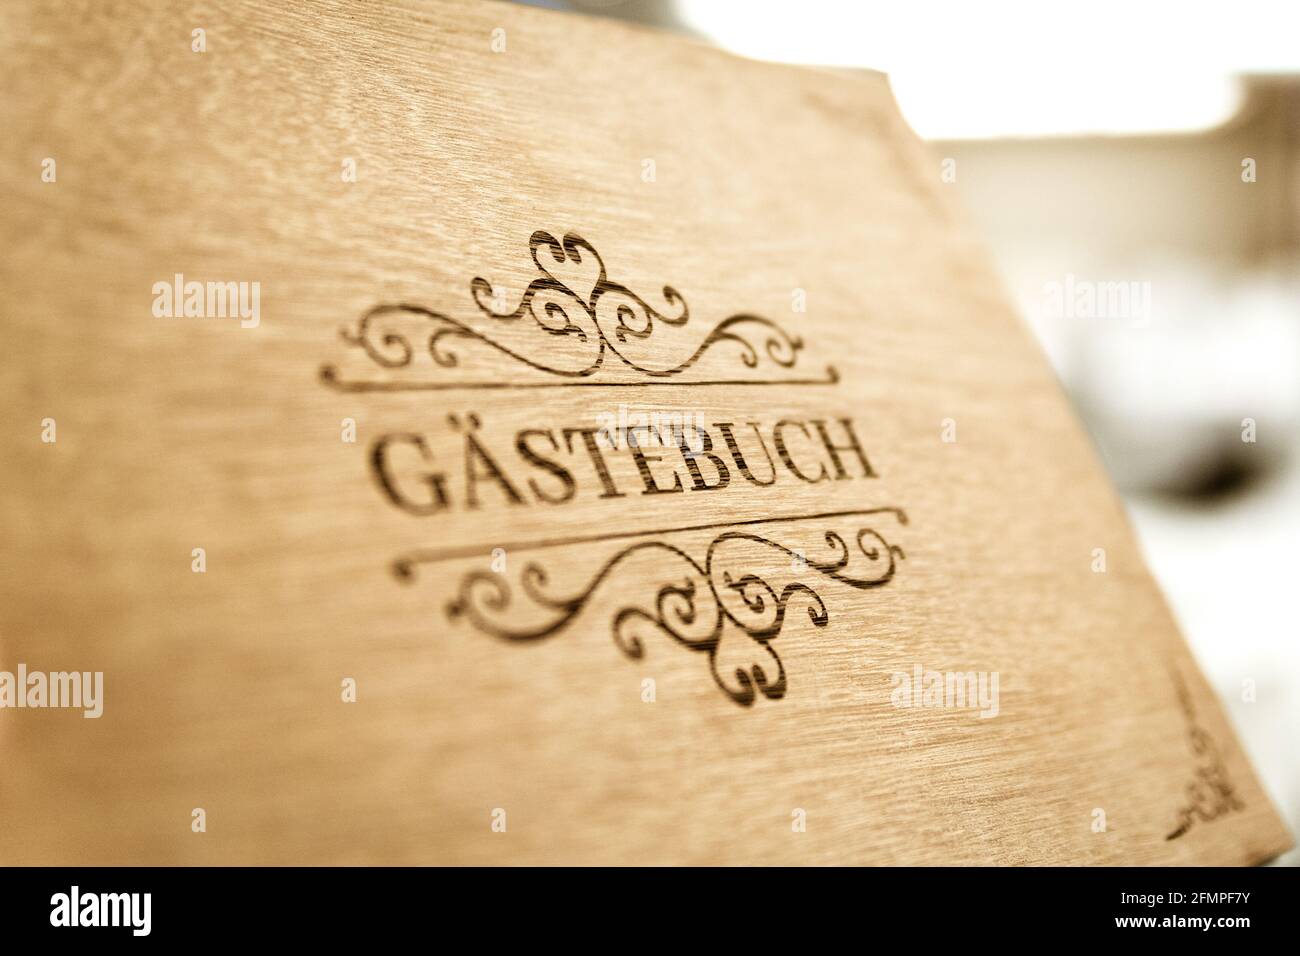 GERMANY, GERMANY - Aug 08, 2020: wooden book with the guestbook sign in a nice and beautiful layout Stock Photo